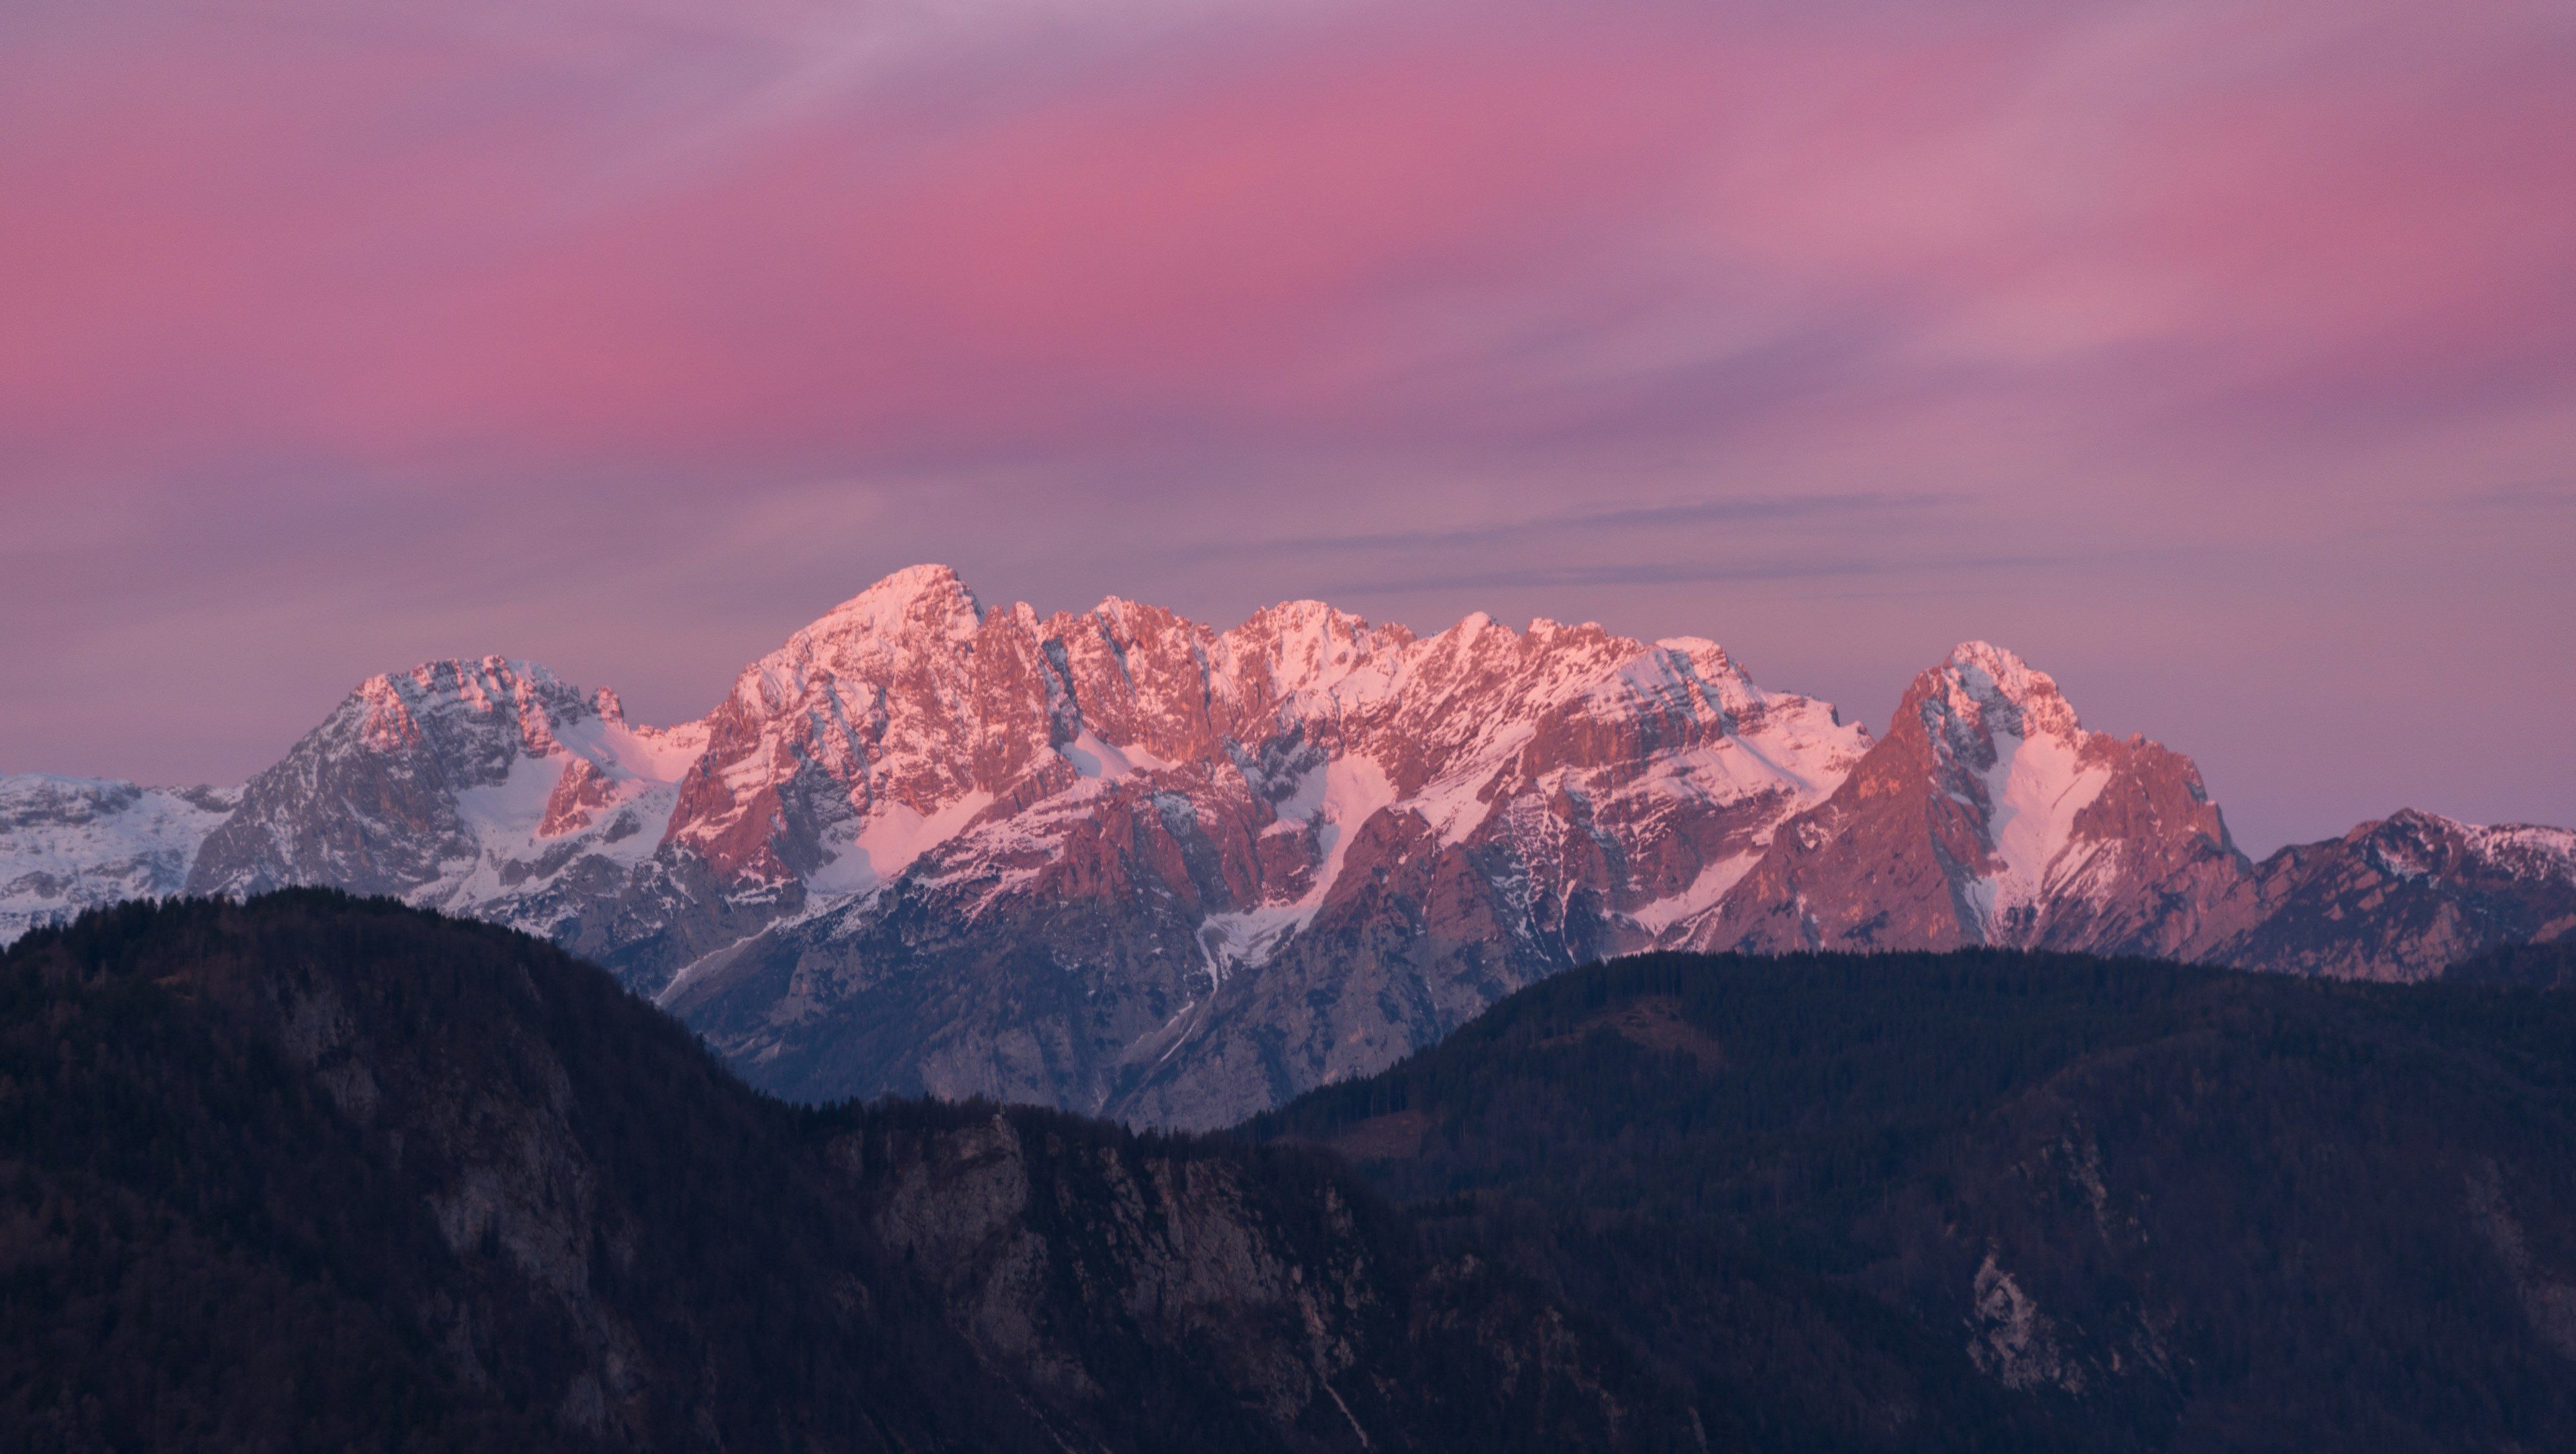 Pink Sunrise In The Mountains 4k Wallpaper